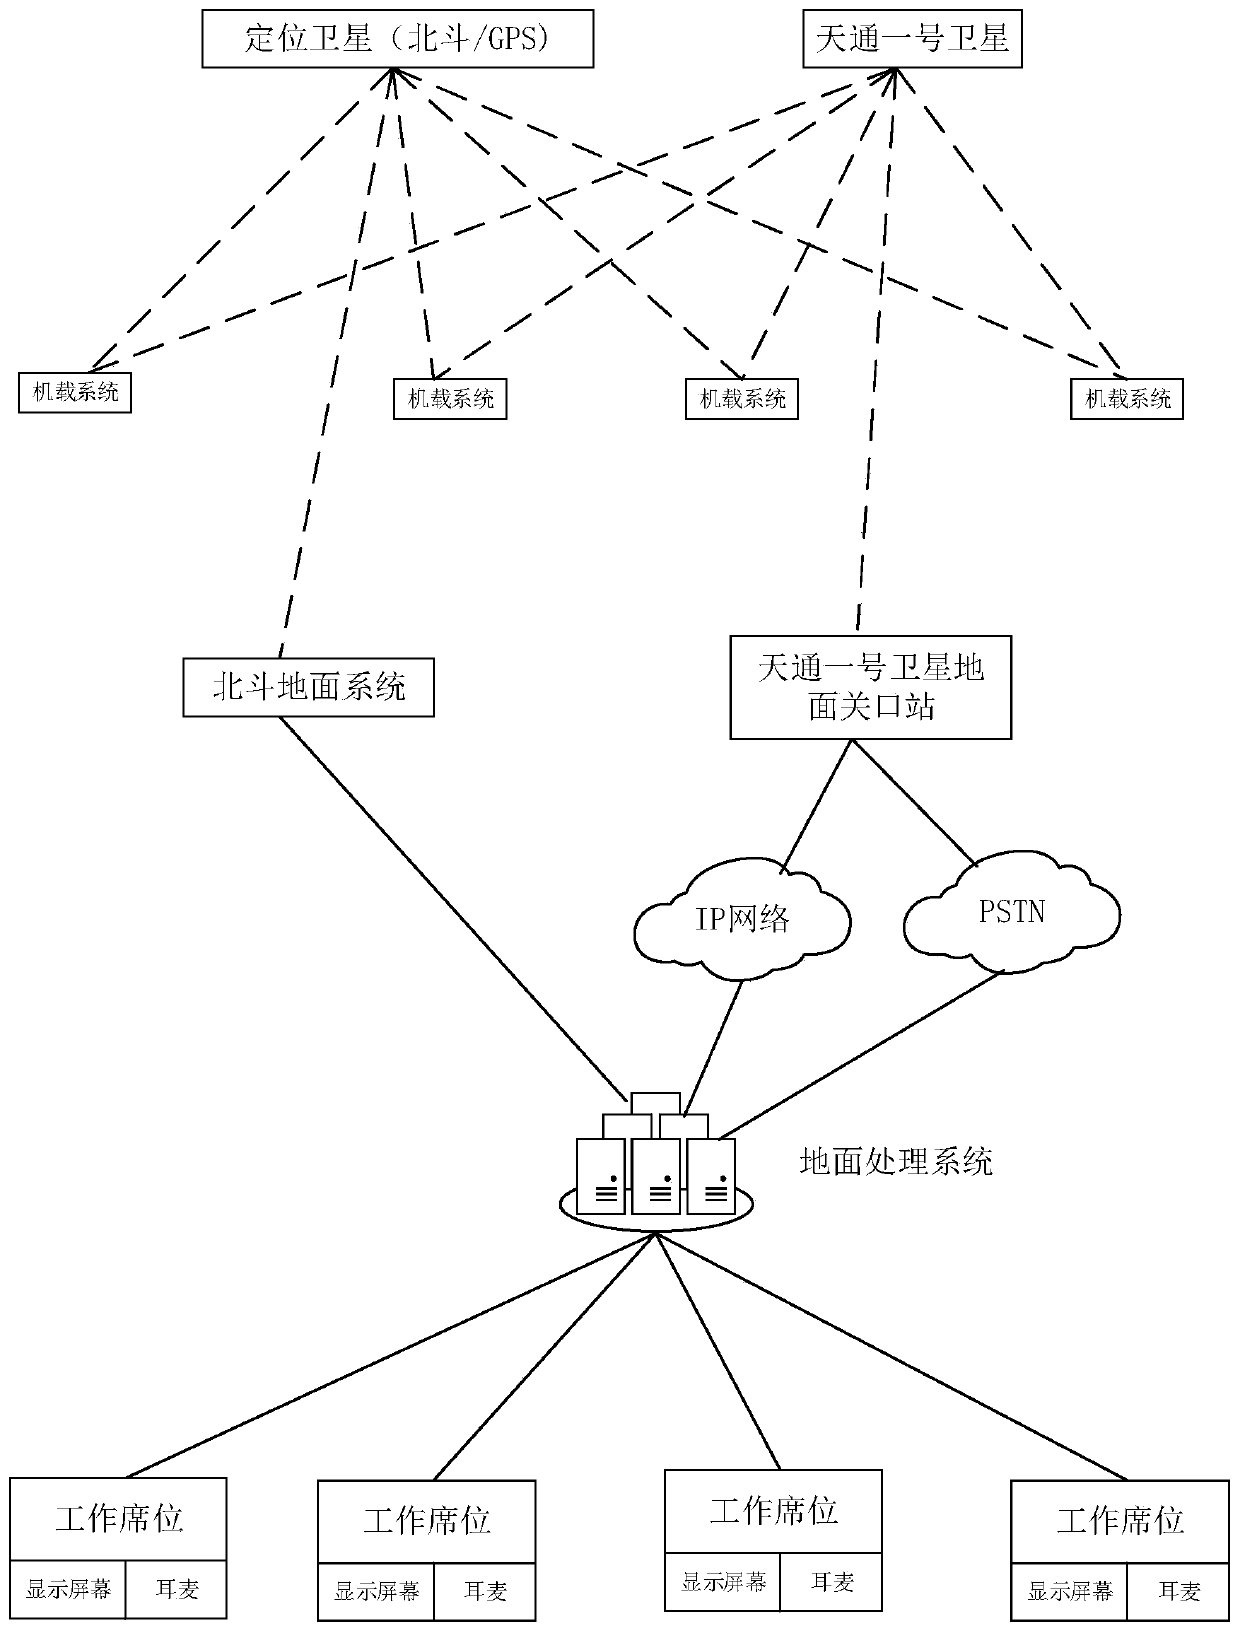 Airborne System and Communication Surveillance System of General Aircraft Based on Tiantong-1 Satellite